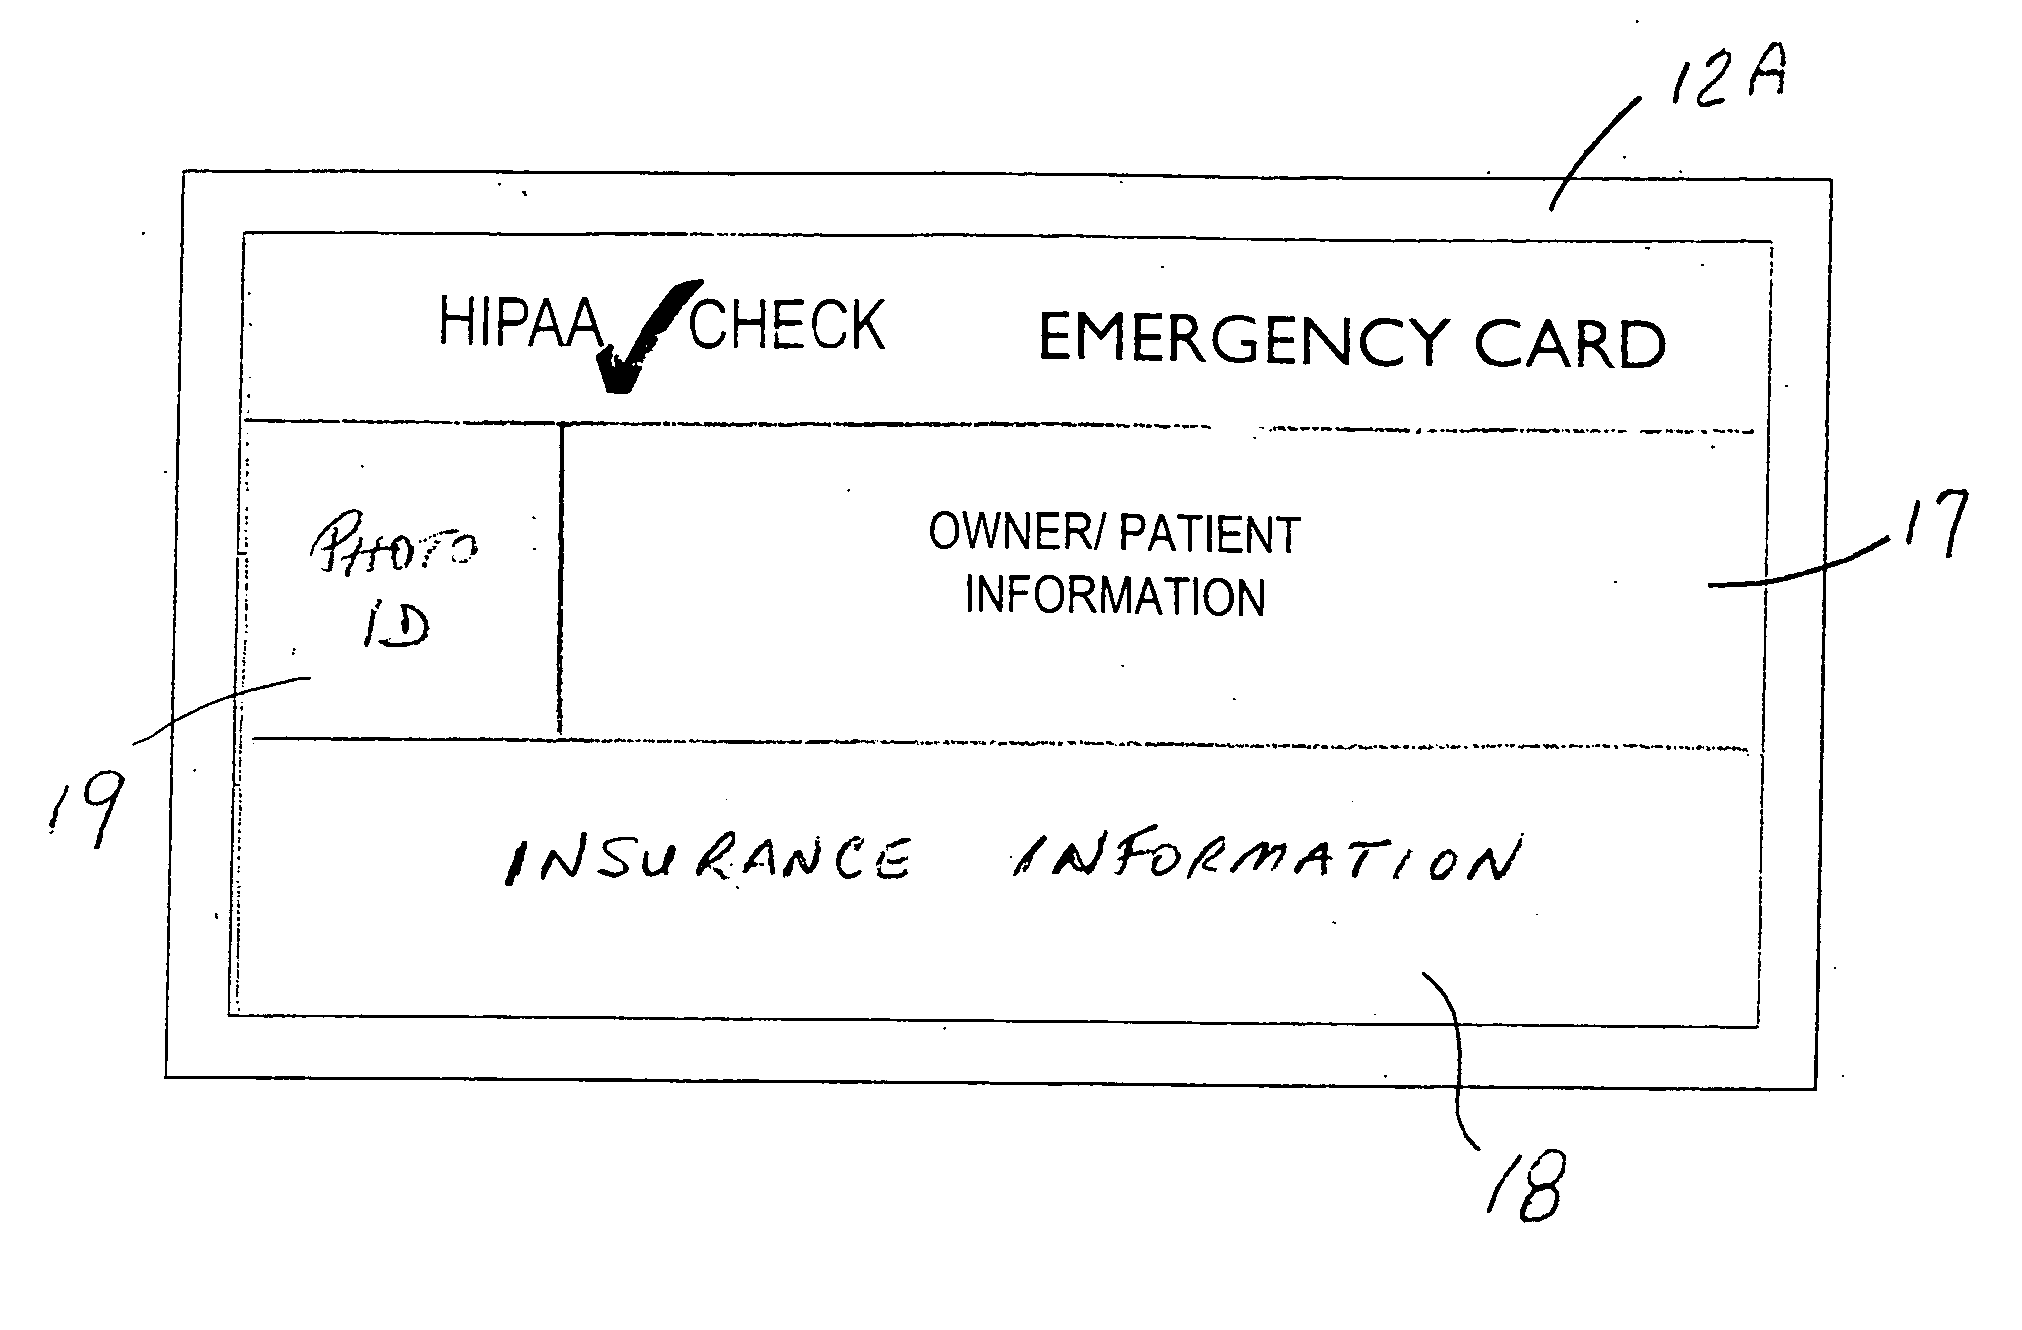 Emergency identification, medical treatment and records access authorization media